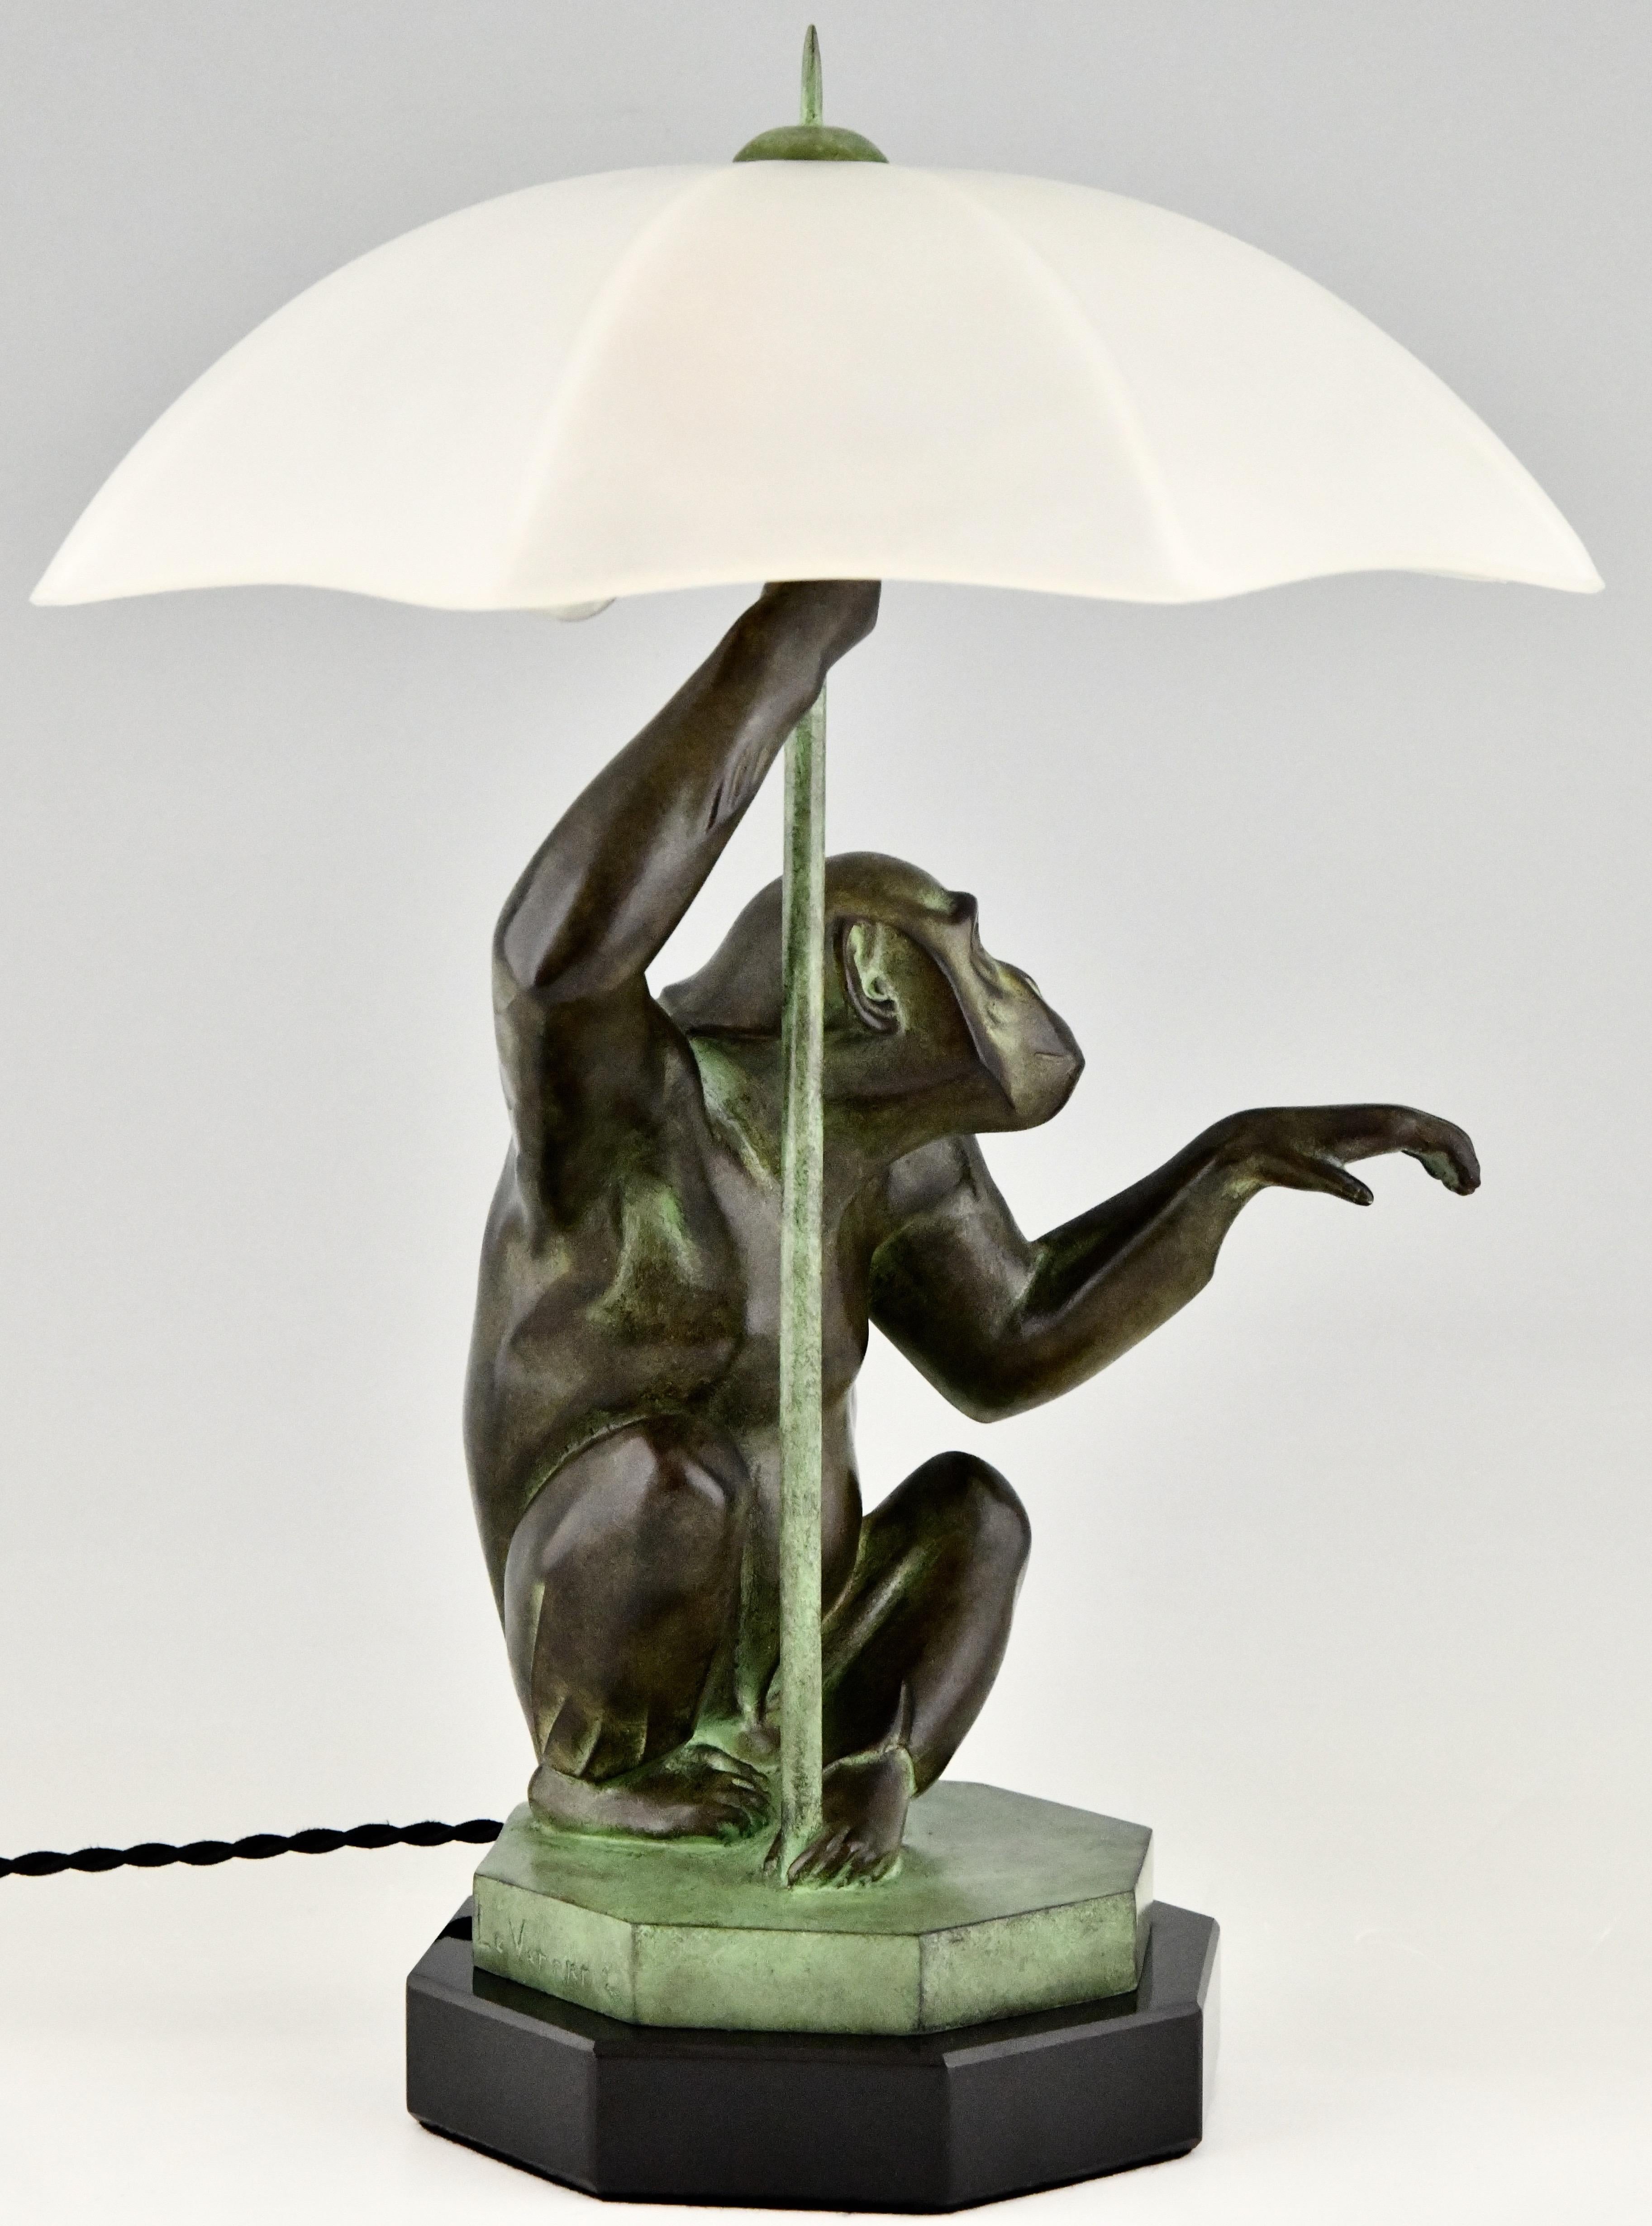 Art Deco Style Table Lamp Monkey with Umbrella by Max Le Verrier France 1